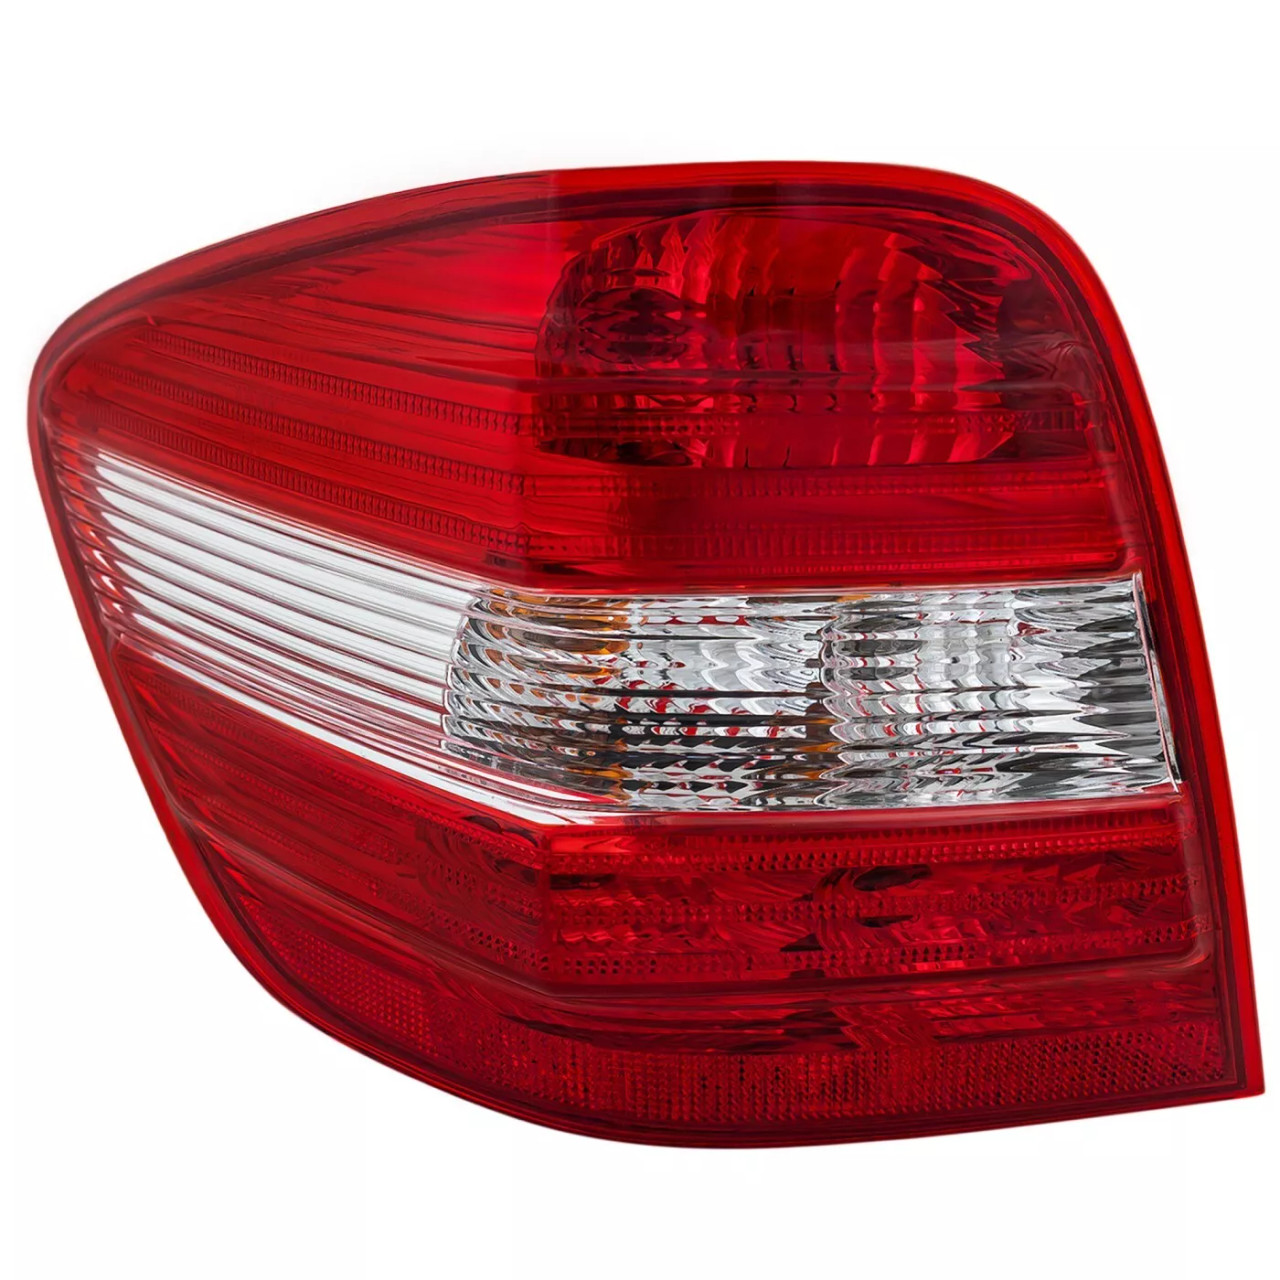 Set of 2 Tail Light For 2006-2011 Mercedes Benz ML350 4Matic LH & RH